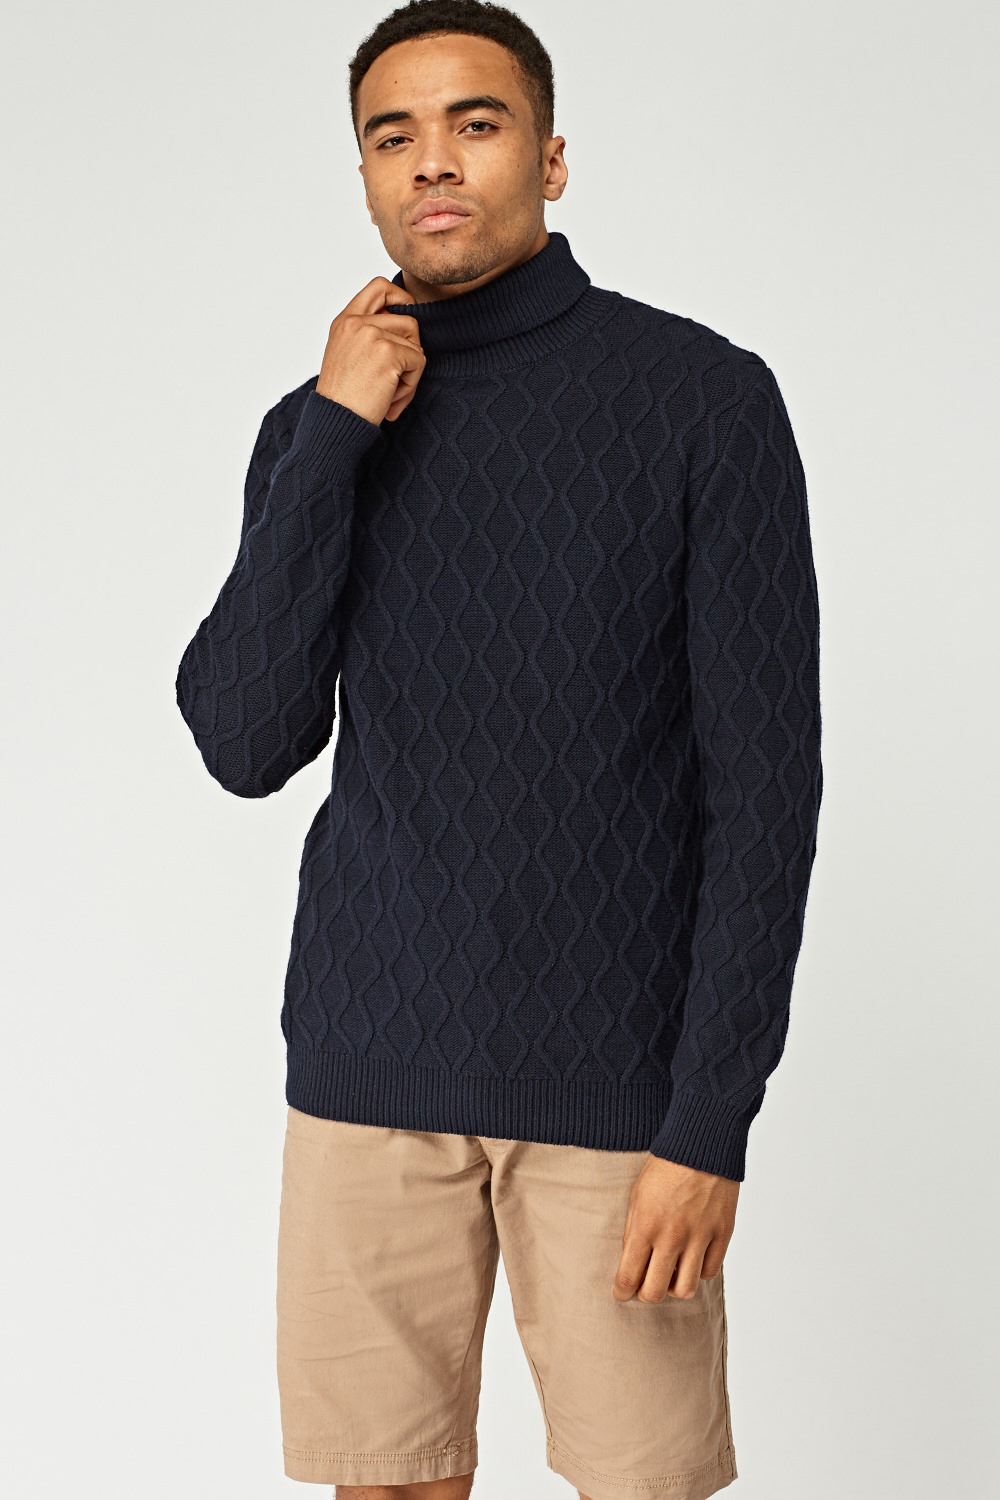 Roll Neck Cable Knit Mens Jumper - Just $7